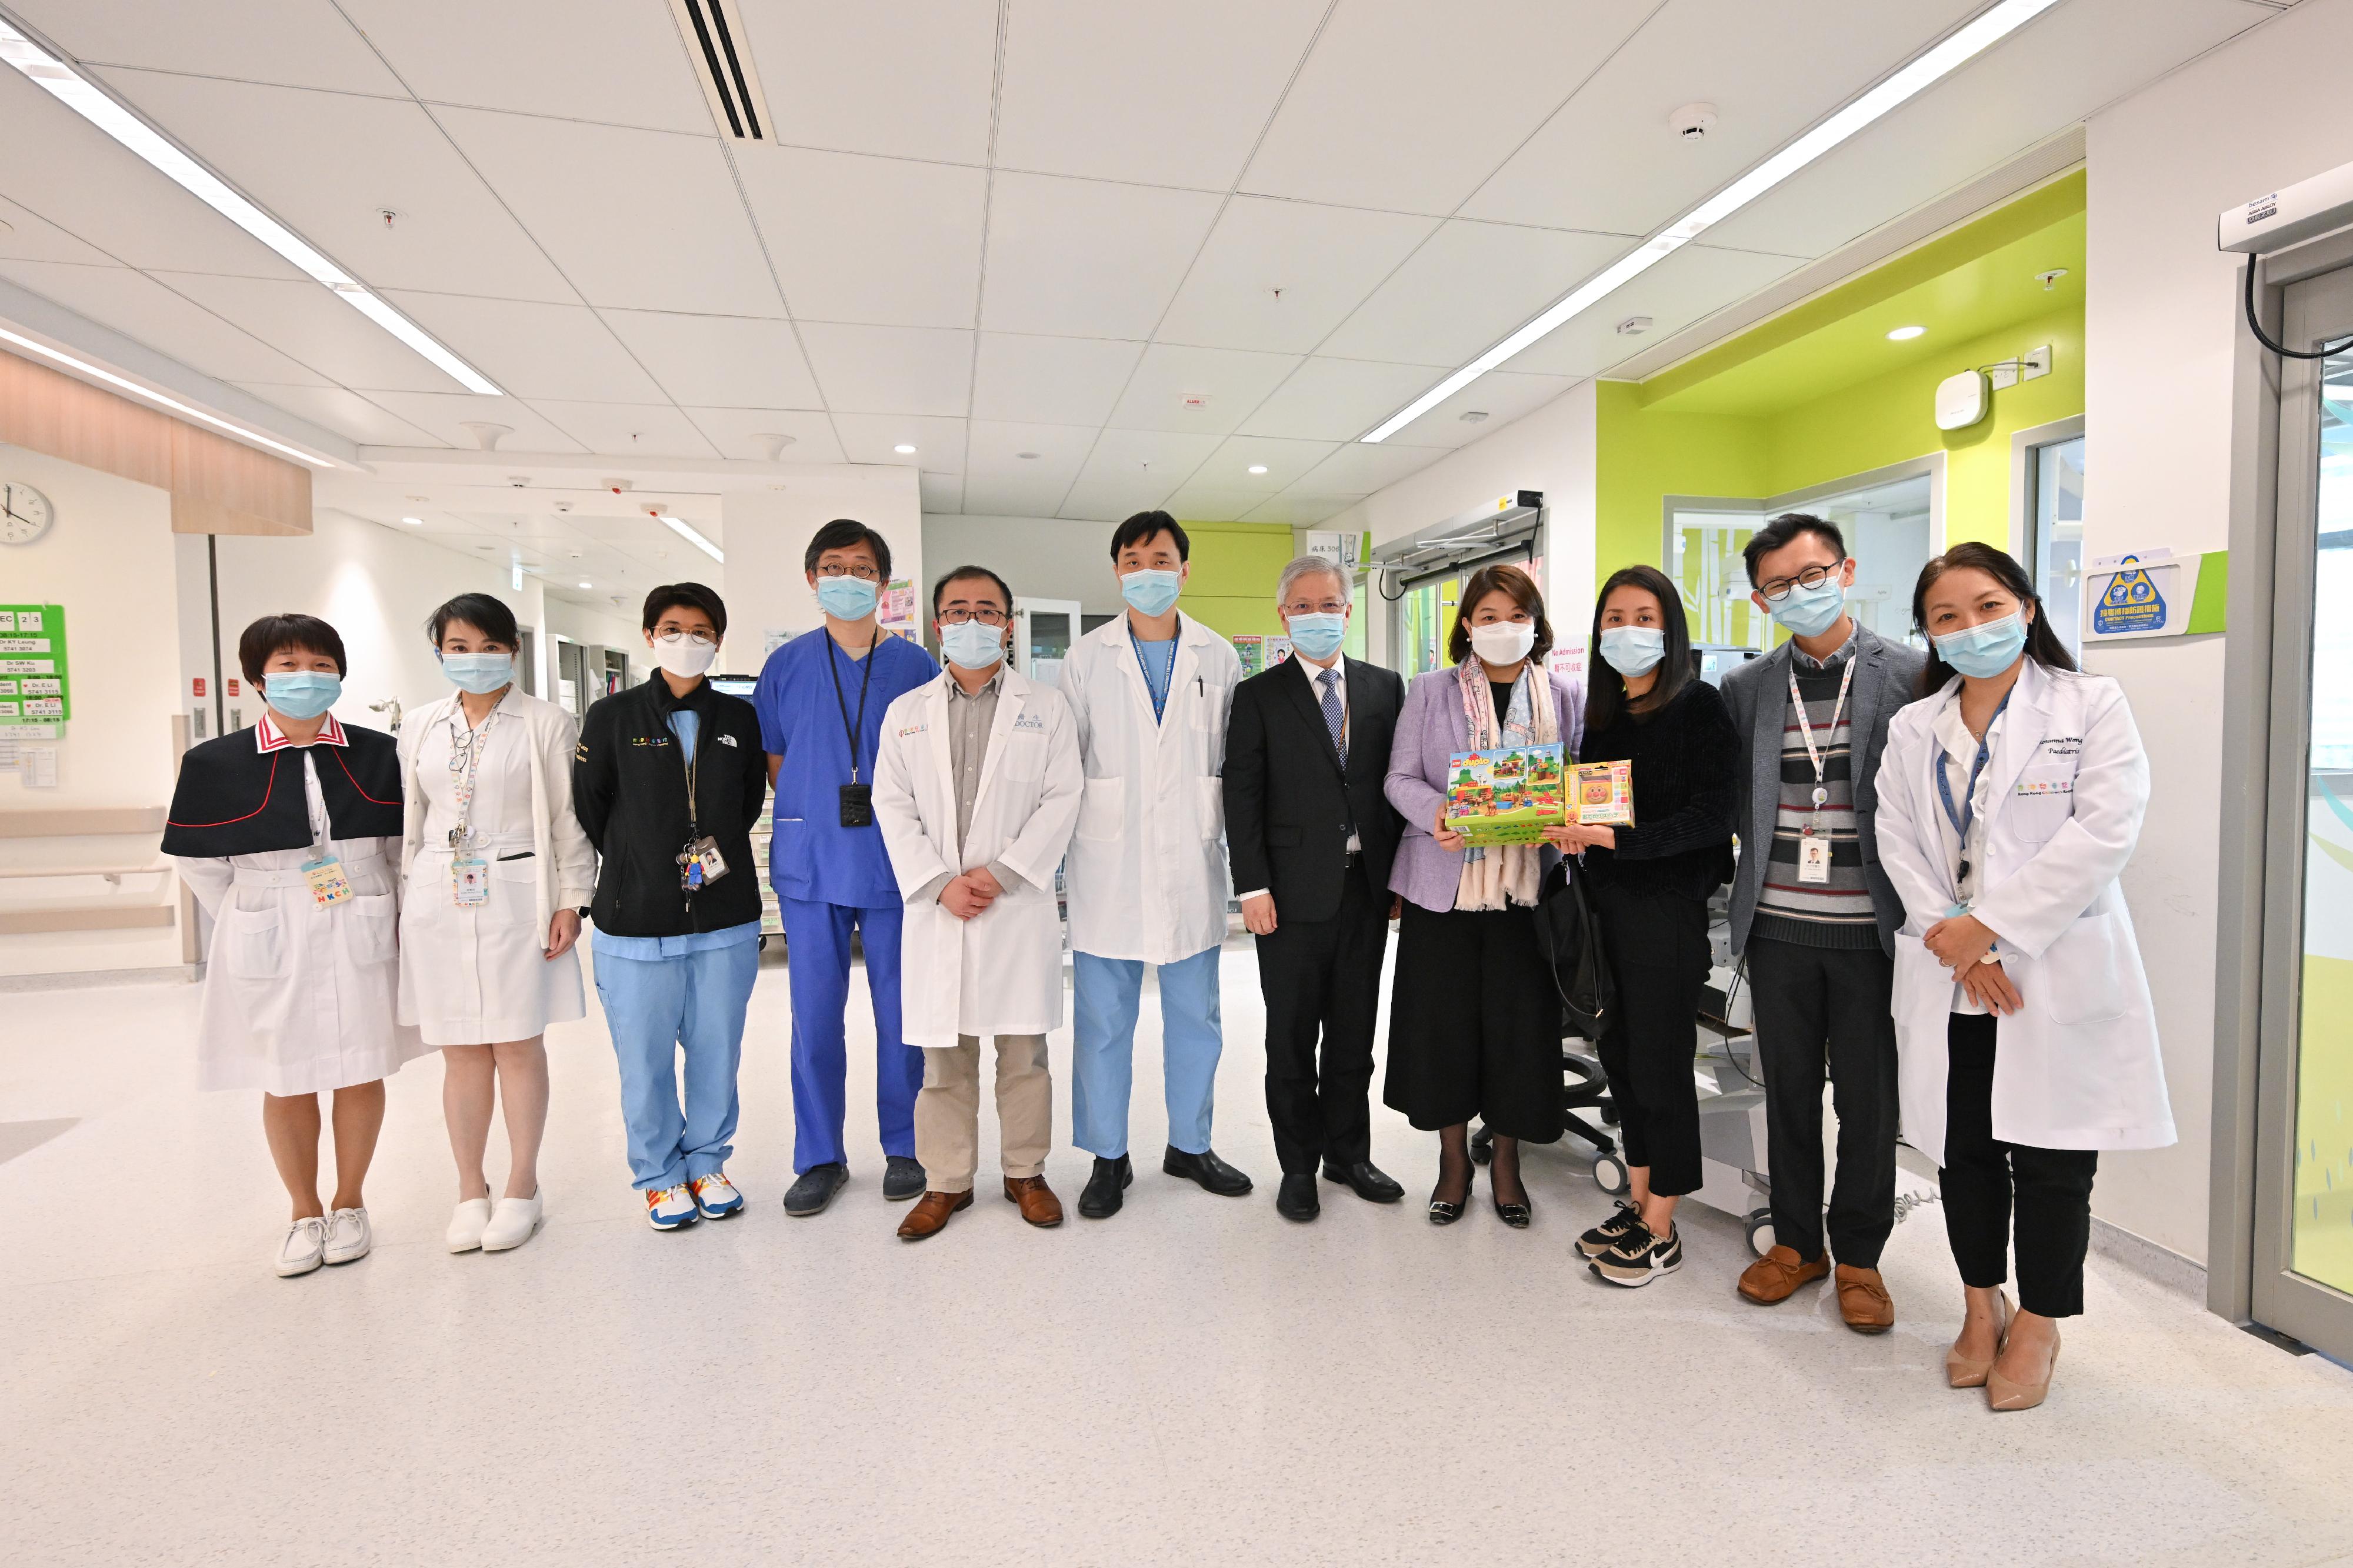 The Under Secretary for Health, Dr Libby Lee, visited Hong Kong Children's Hospital (HKCH) today (December 23). Photo shows Dr Libby Lee (fourth right) and the Hospital Chief Executive of HKCH, Dr Lee Tsz-leung (fifth right), in a group photo with the medical team treating Tsz-hei.